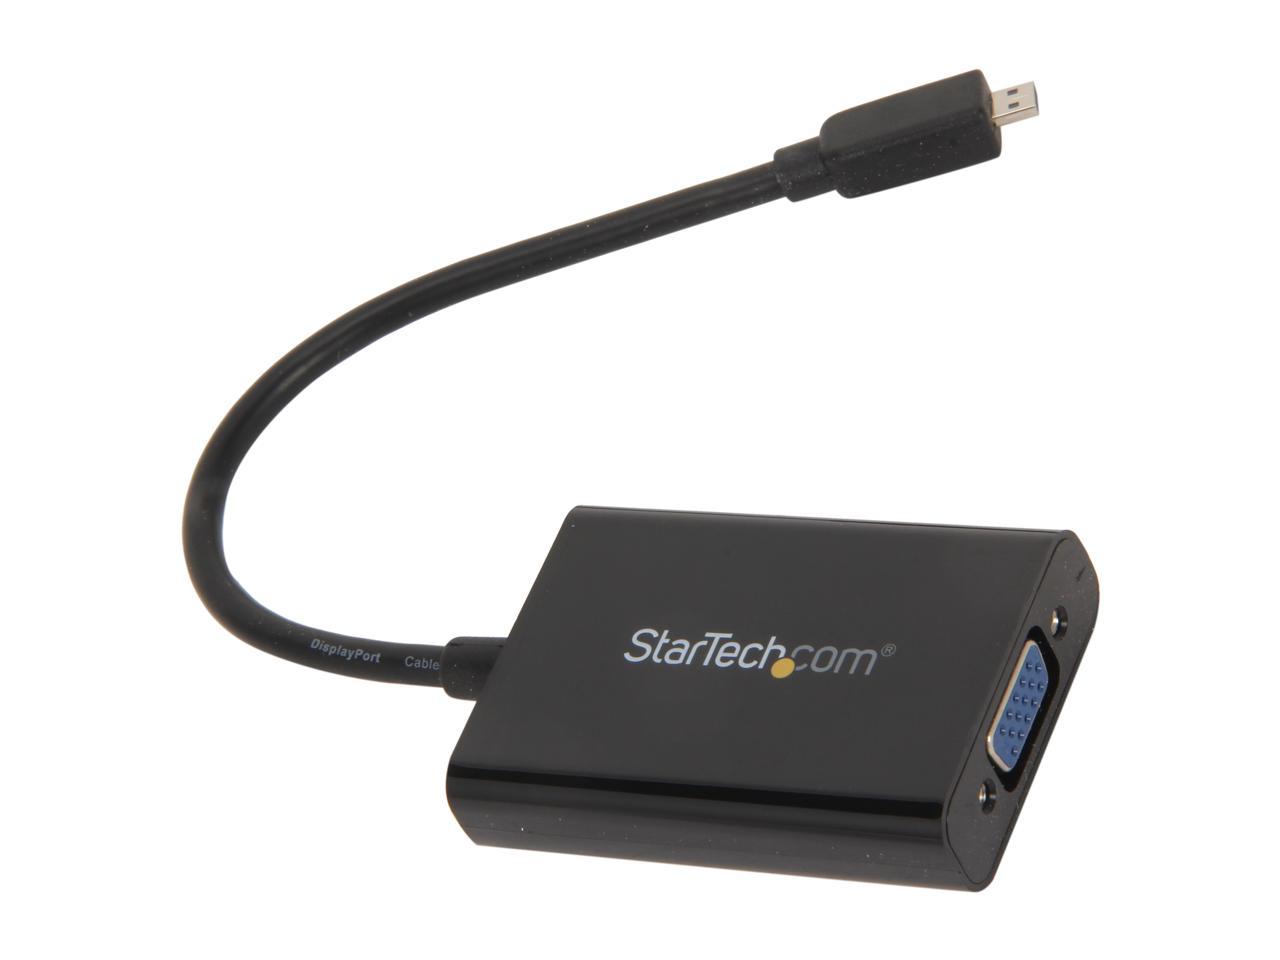 StarTech.com MCHD2VGAA2 Micro HDMI to VGA Adapter Converter with Audio for Smartphones / Ultrabooks / Tablets - 1920x1200 - image 2 of 3